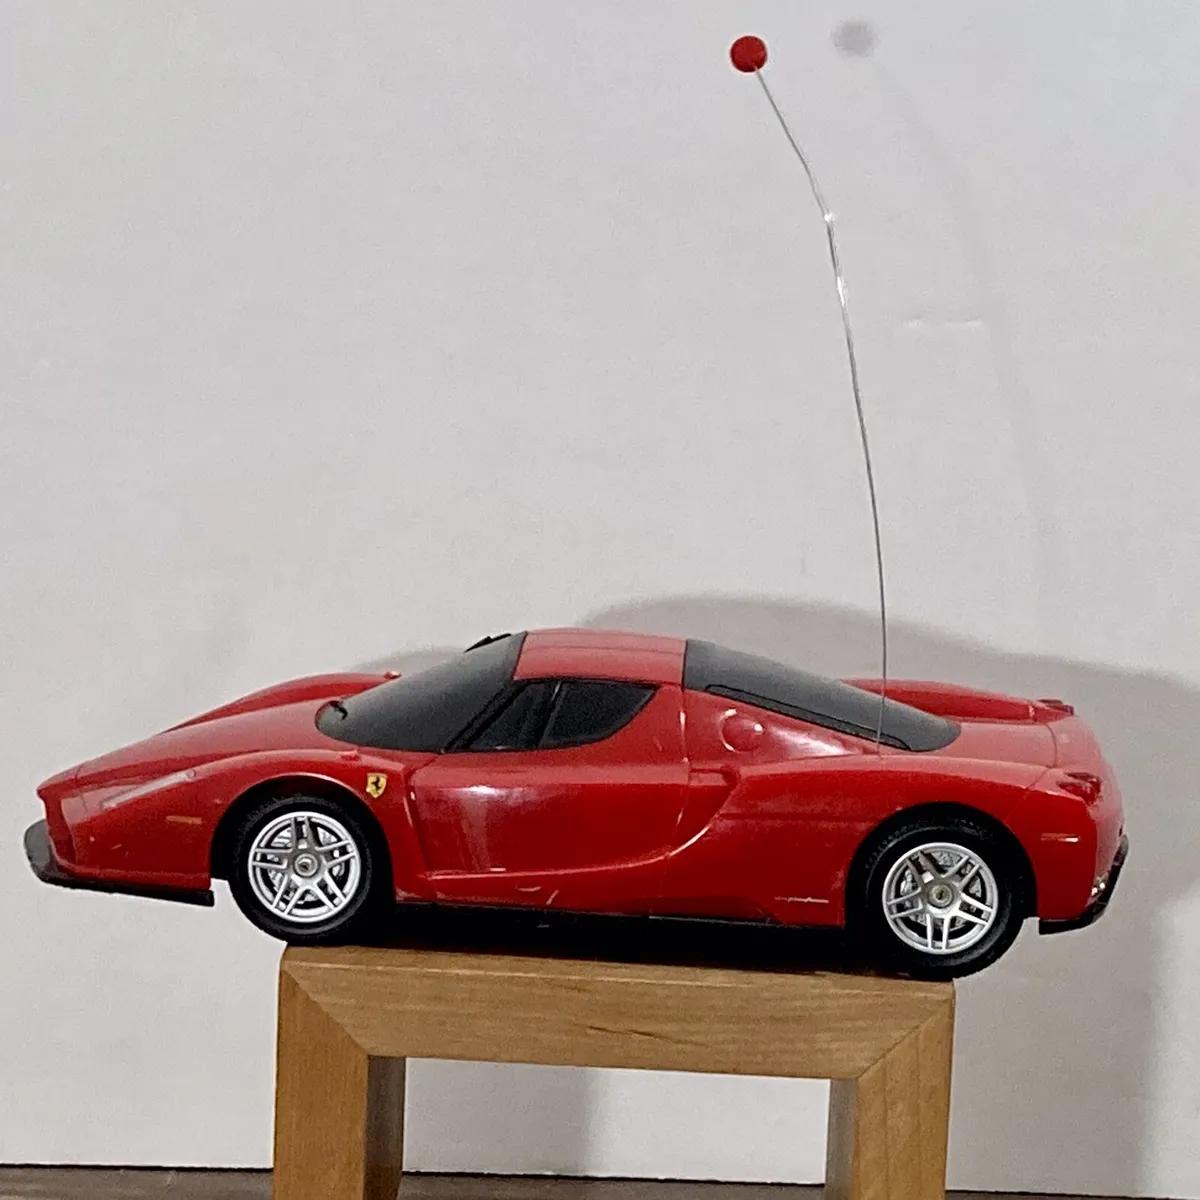 Mjx Rc Ferrari: Maintaining Your MJX RC Ferrari: Tips and Tricks to Keep it Rolling Smoothly